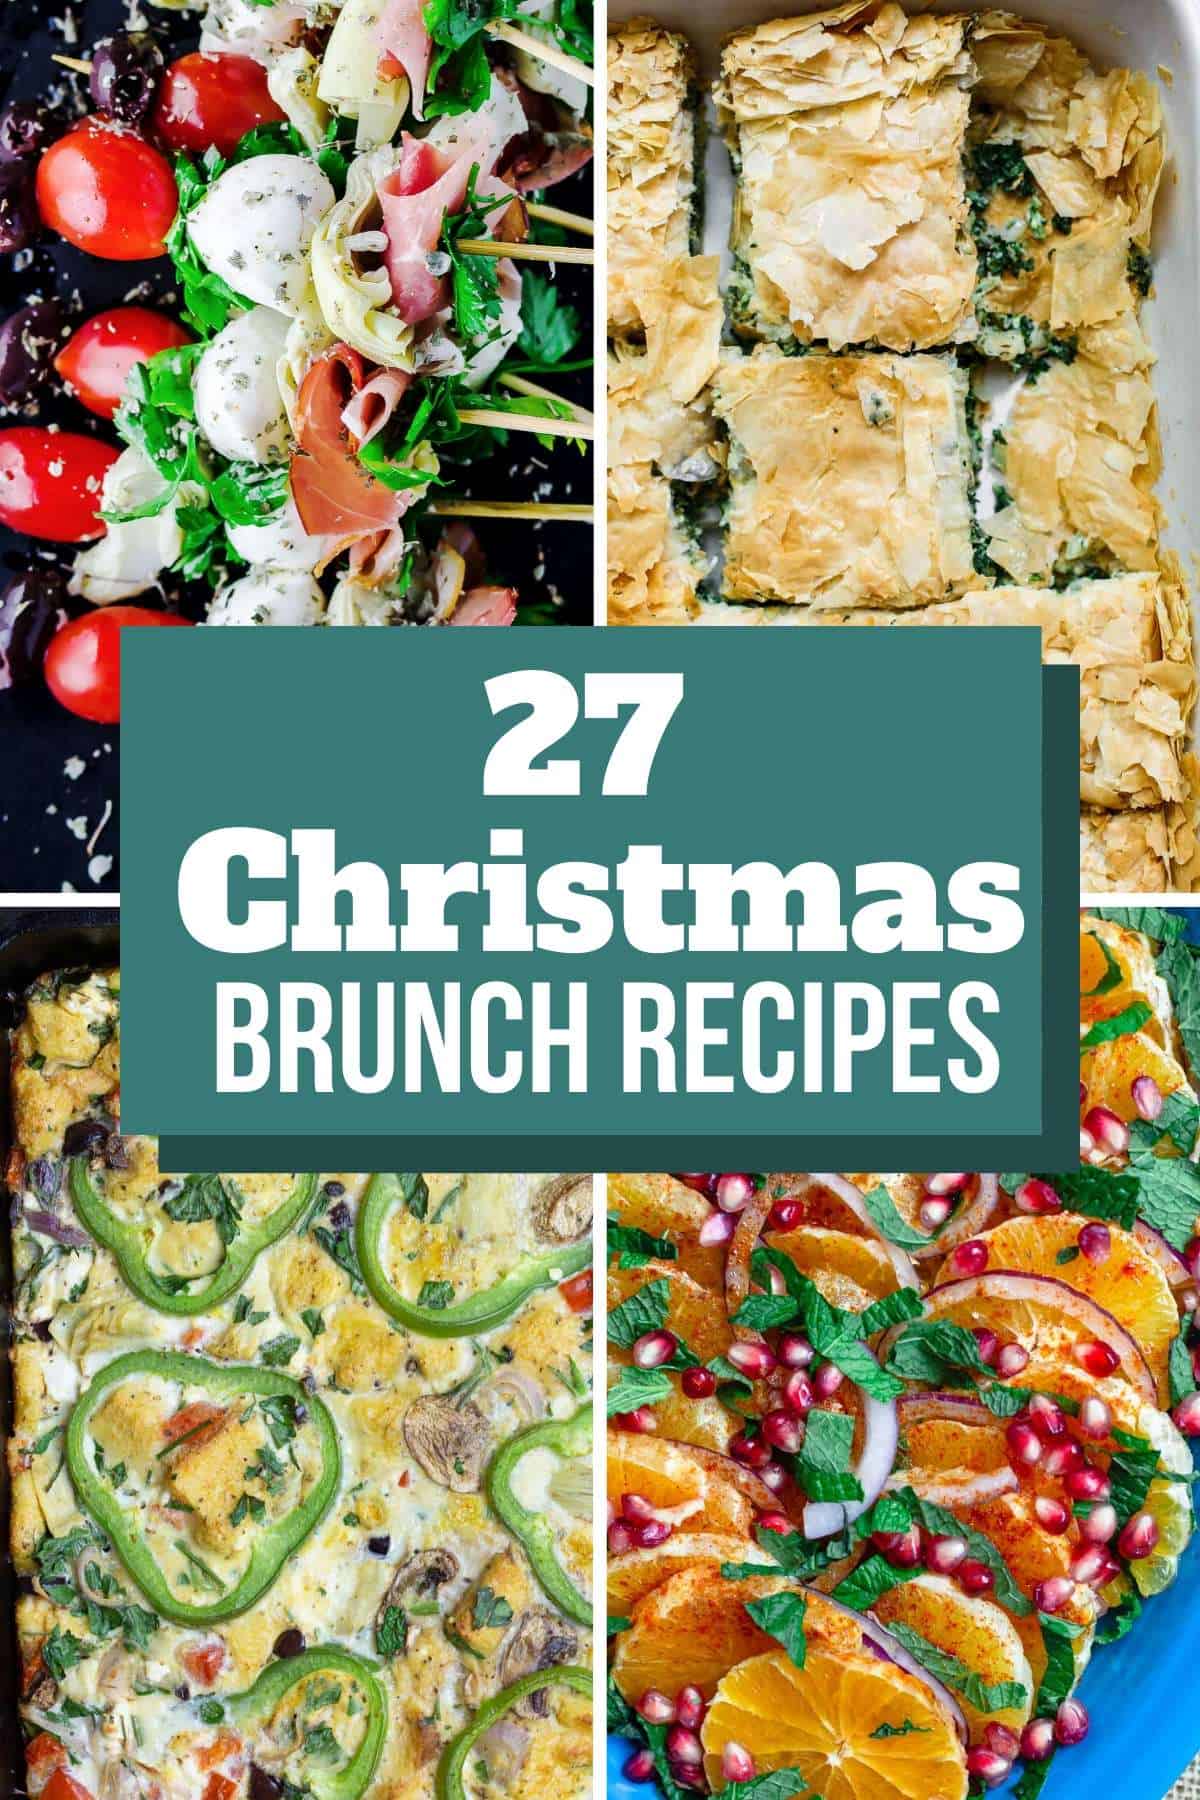 27 Christmas Brunch Recipes with a Mediterranean Twist | The ...